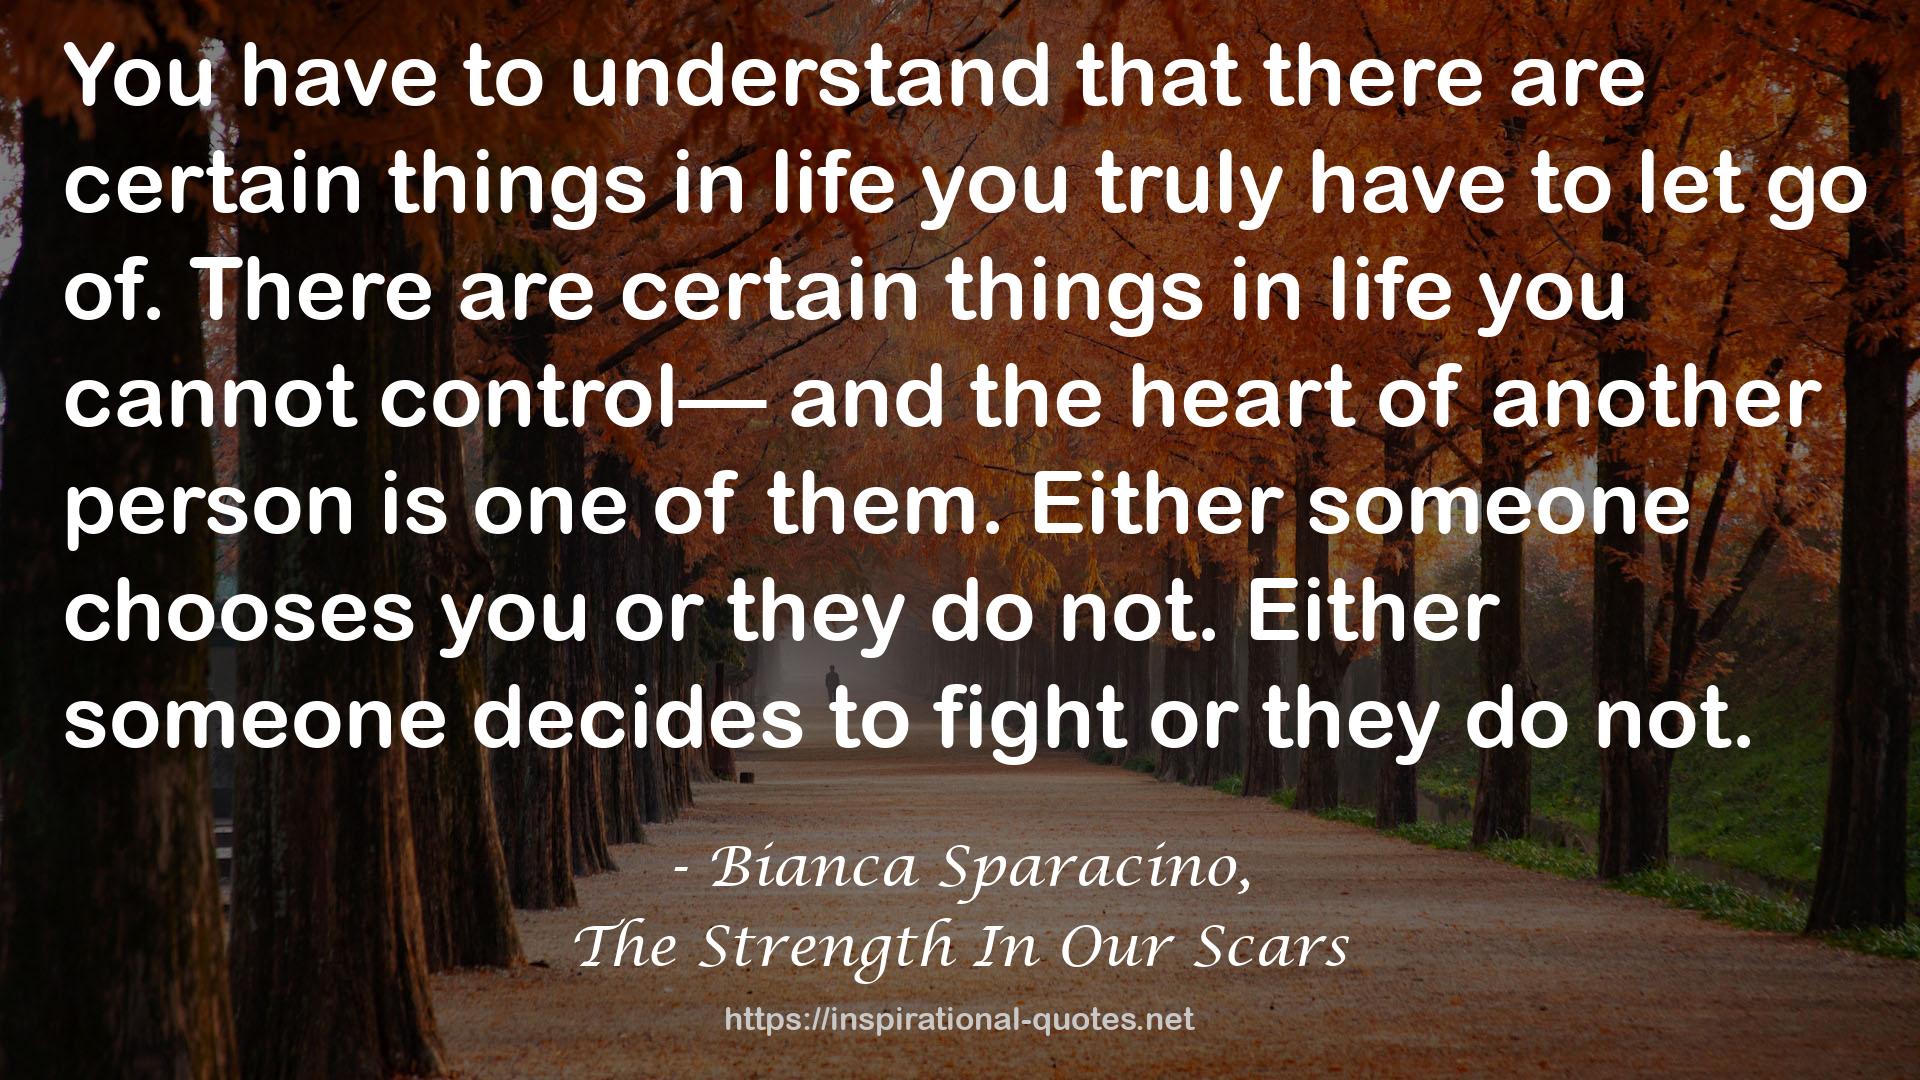 The Strength In Our Scars QUOTES